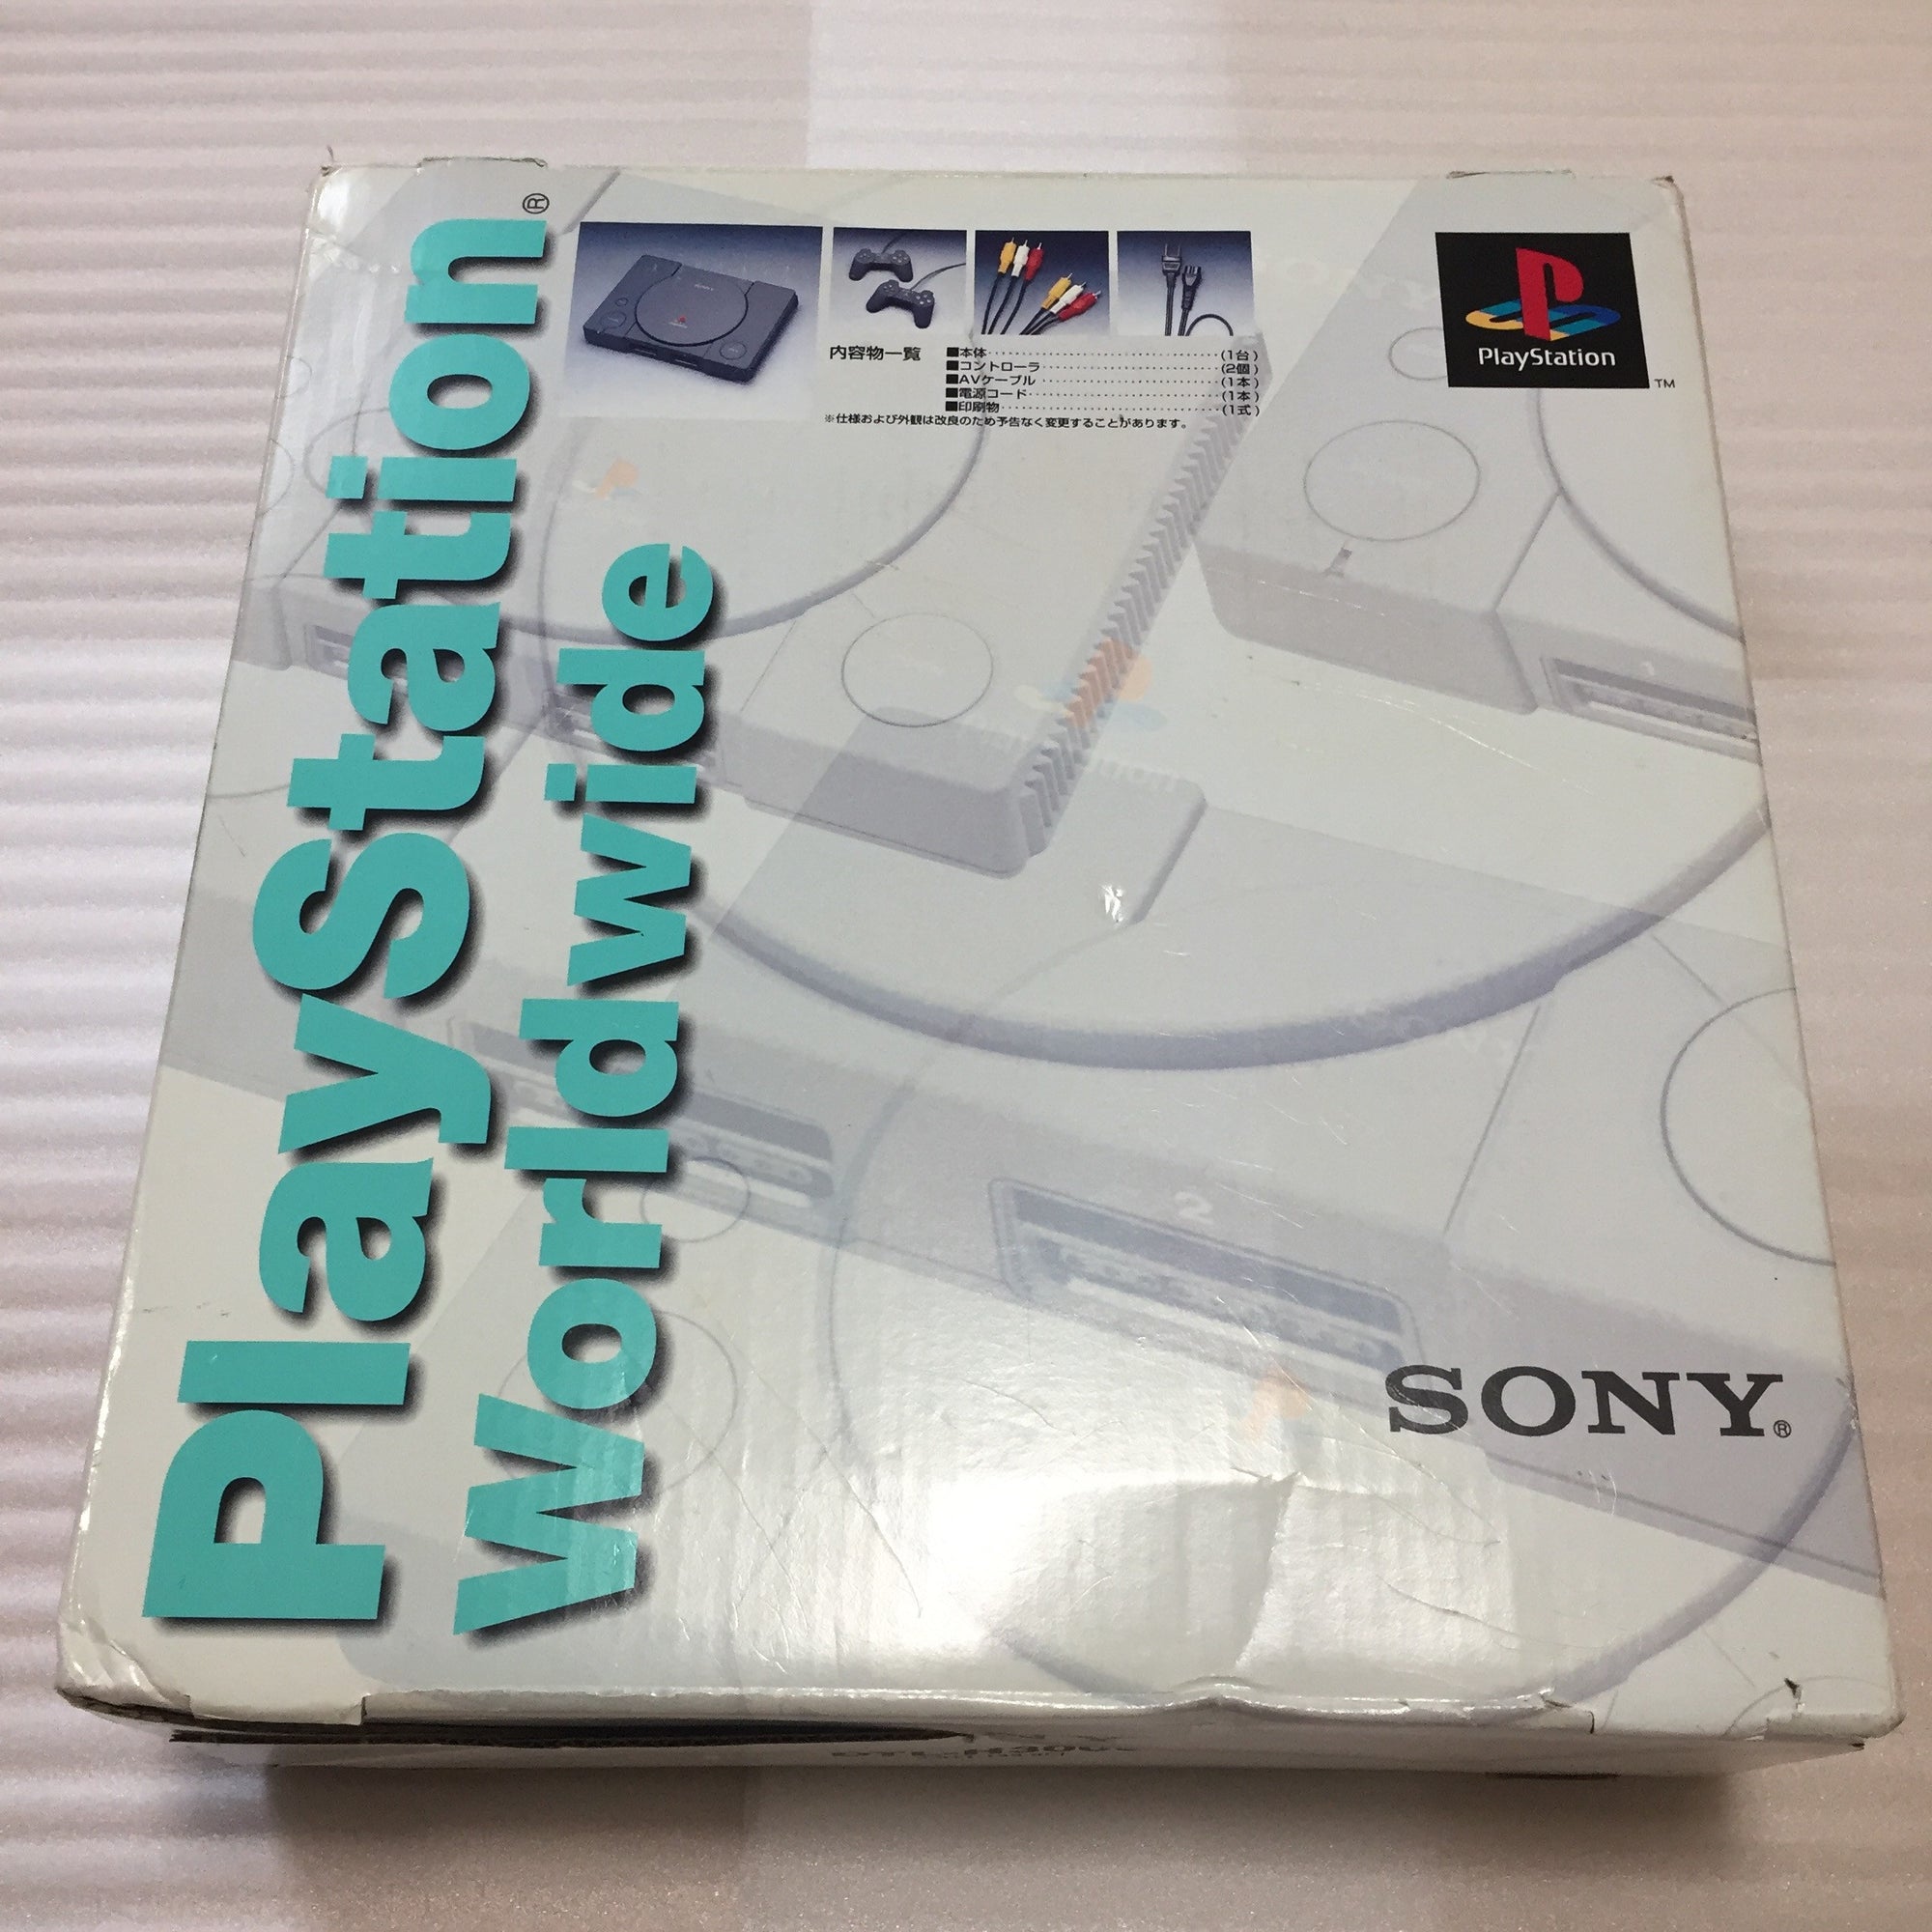 Boxed PS1 DTL-H3000 with RGB cable